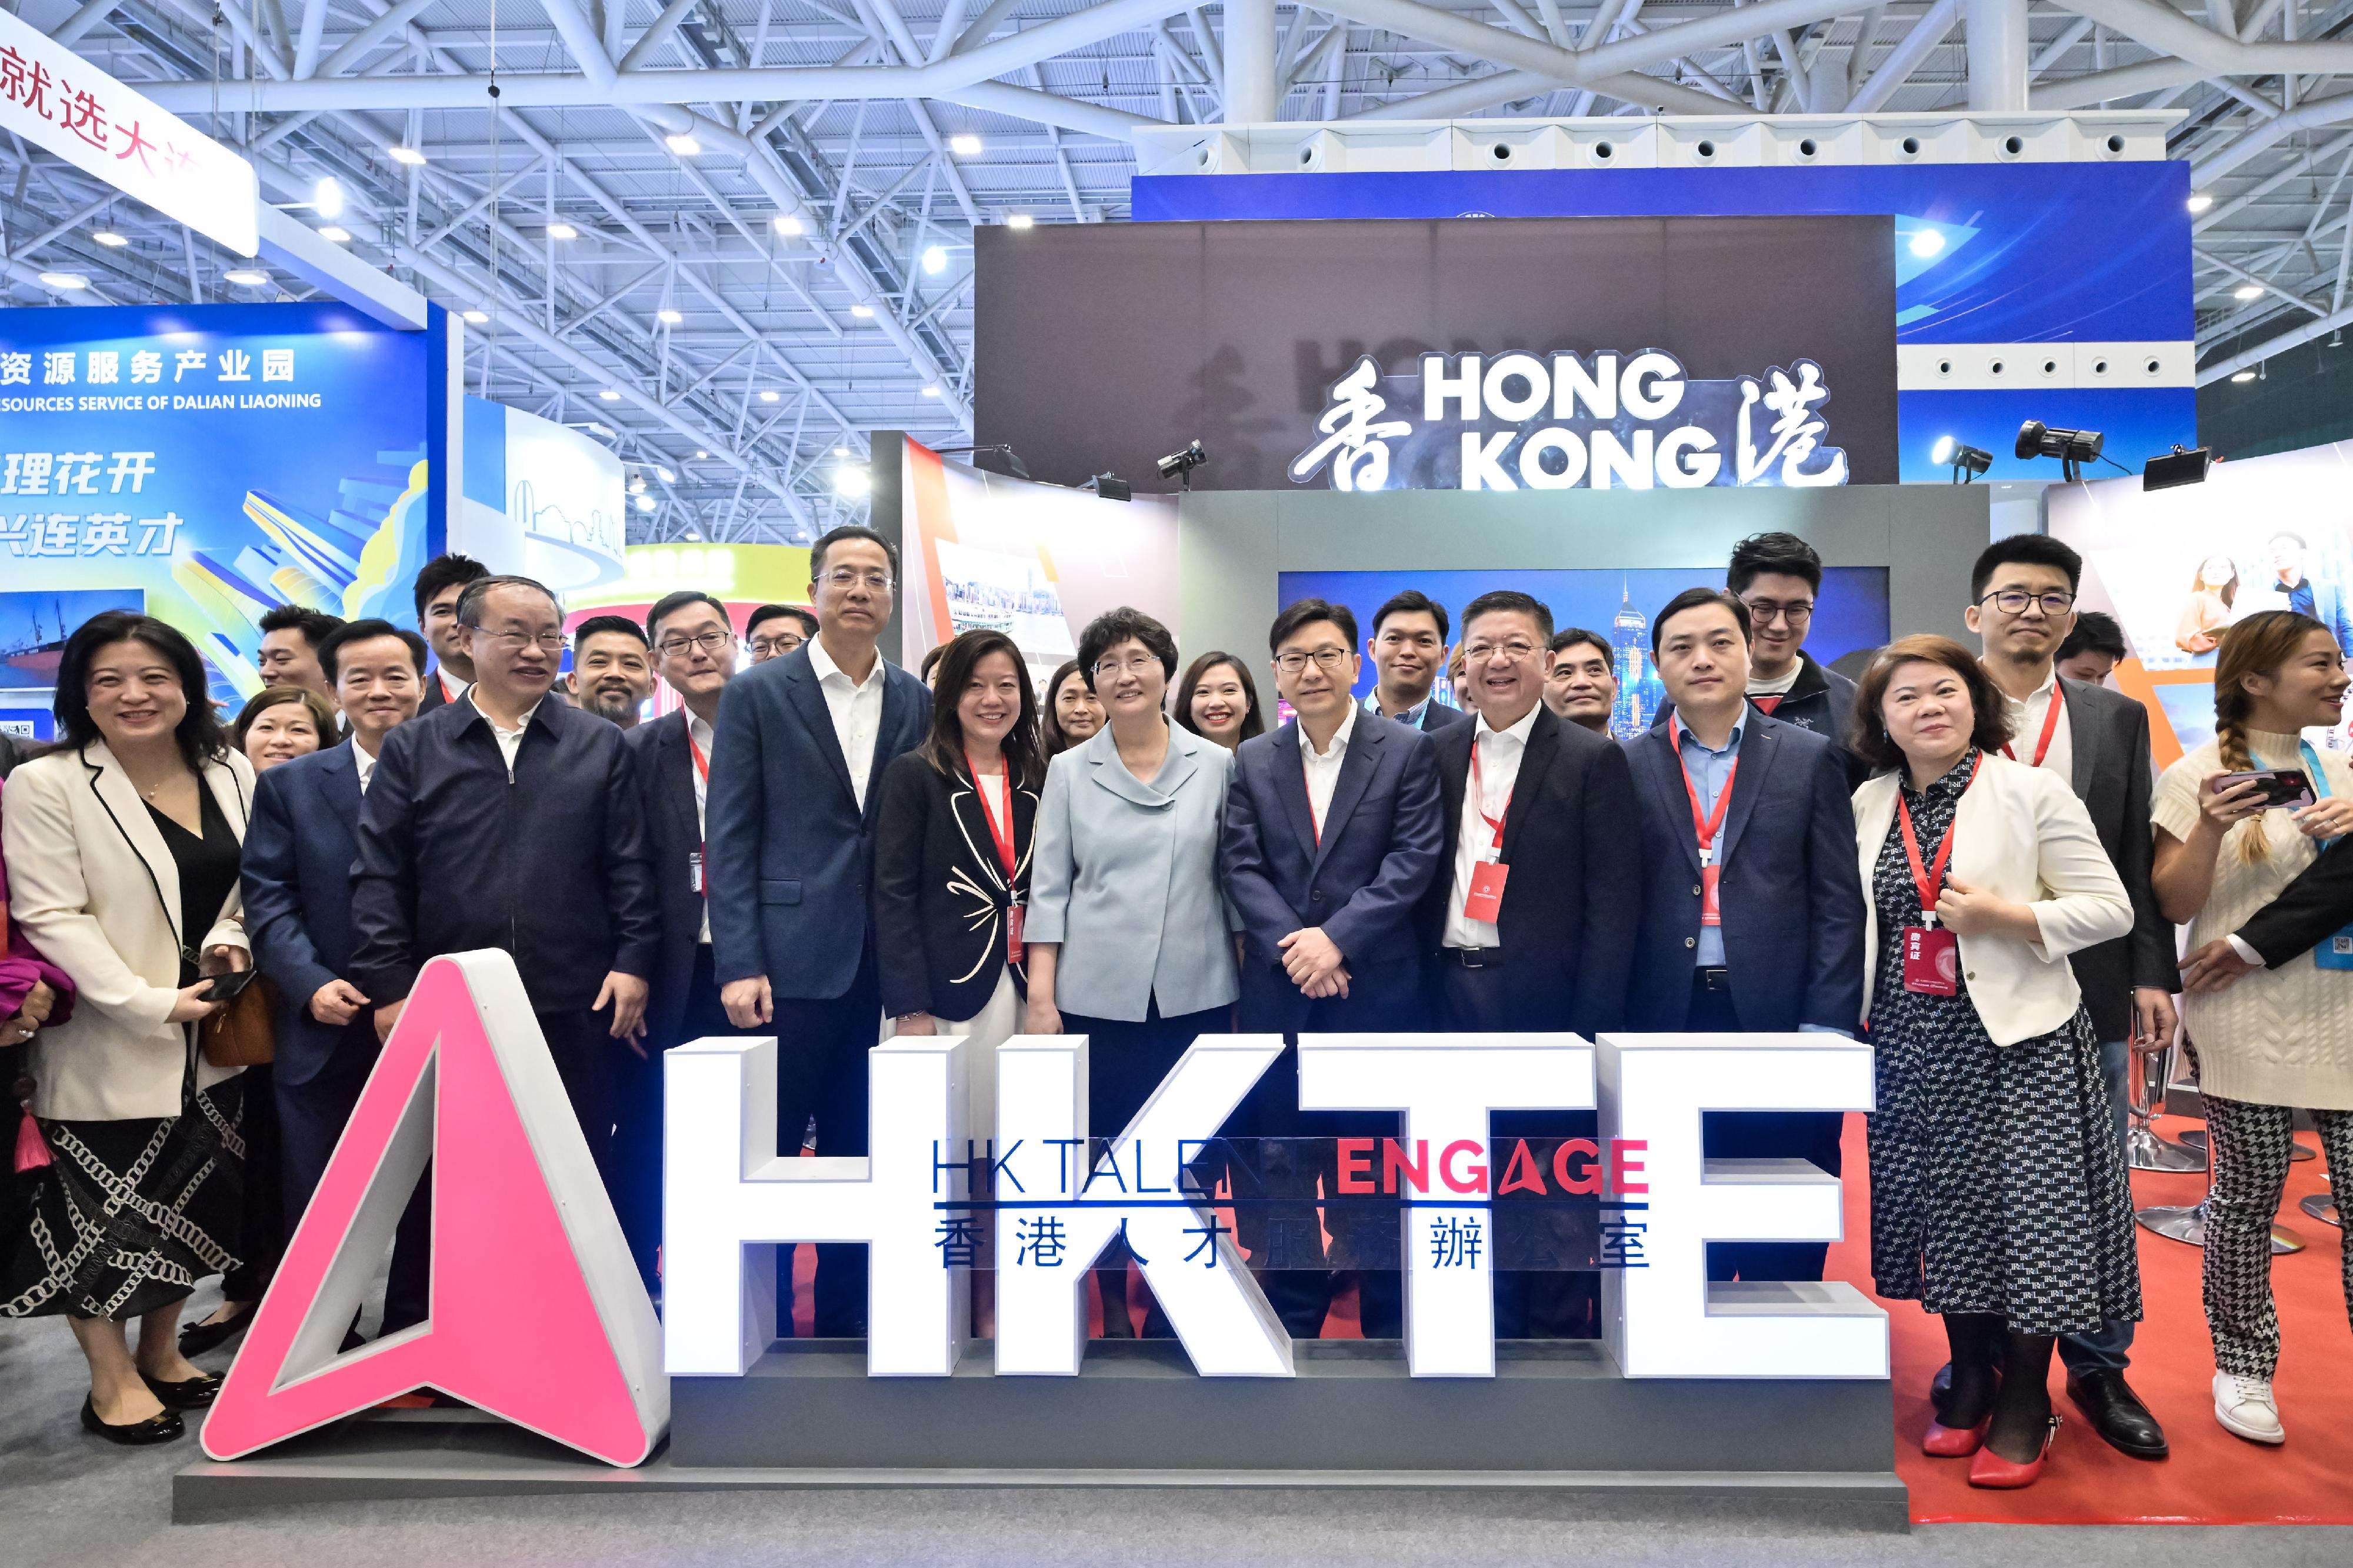 The Secretary for Labour and Welfare, Mr Chris Sun, today (November 22) led a Hong Kong Special Administrative Region delegation to attend the 2nd National Conference on the Development of Human Resources Services in Shenzhen. Photo shows the Minister of Human Resources and Social Security, Ms Wang Xiaoping (front row, seventh left), visiting the exhibition area of Hong Kong Talent Engage (HKTE) this morning, accompanied by Mr Sun (front row, eighth left); the Commissioner for Labour, Ms May Chan (front row, sixth left); and the Director of HKTE, Mr Anthony Lau (front row, ninth left).